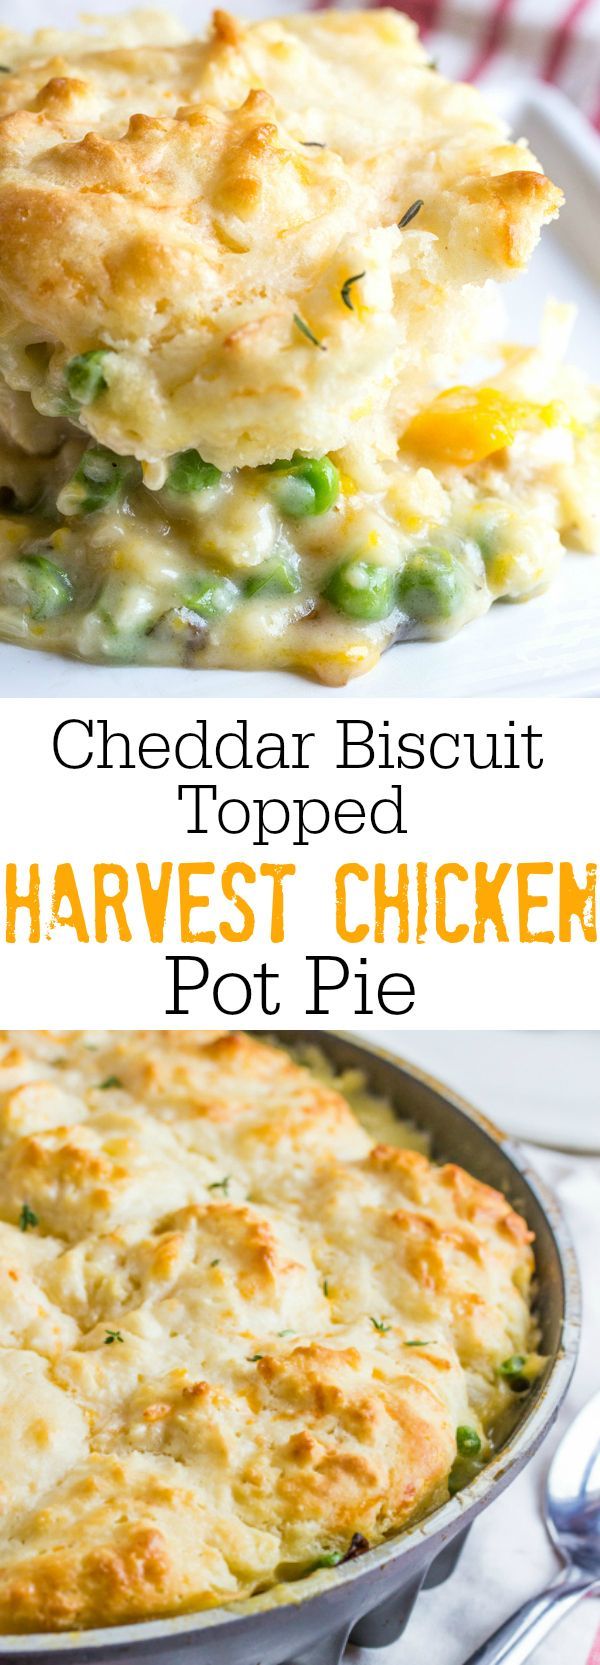 Cheddar Biscuits Topped Harvest Chicken Pot Pie -   23 fall dinner recipes
 ideas